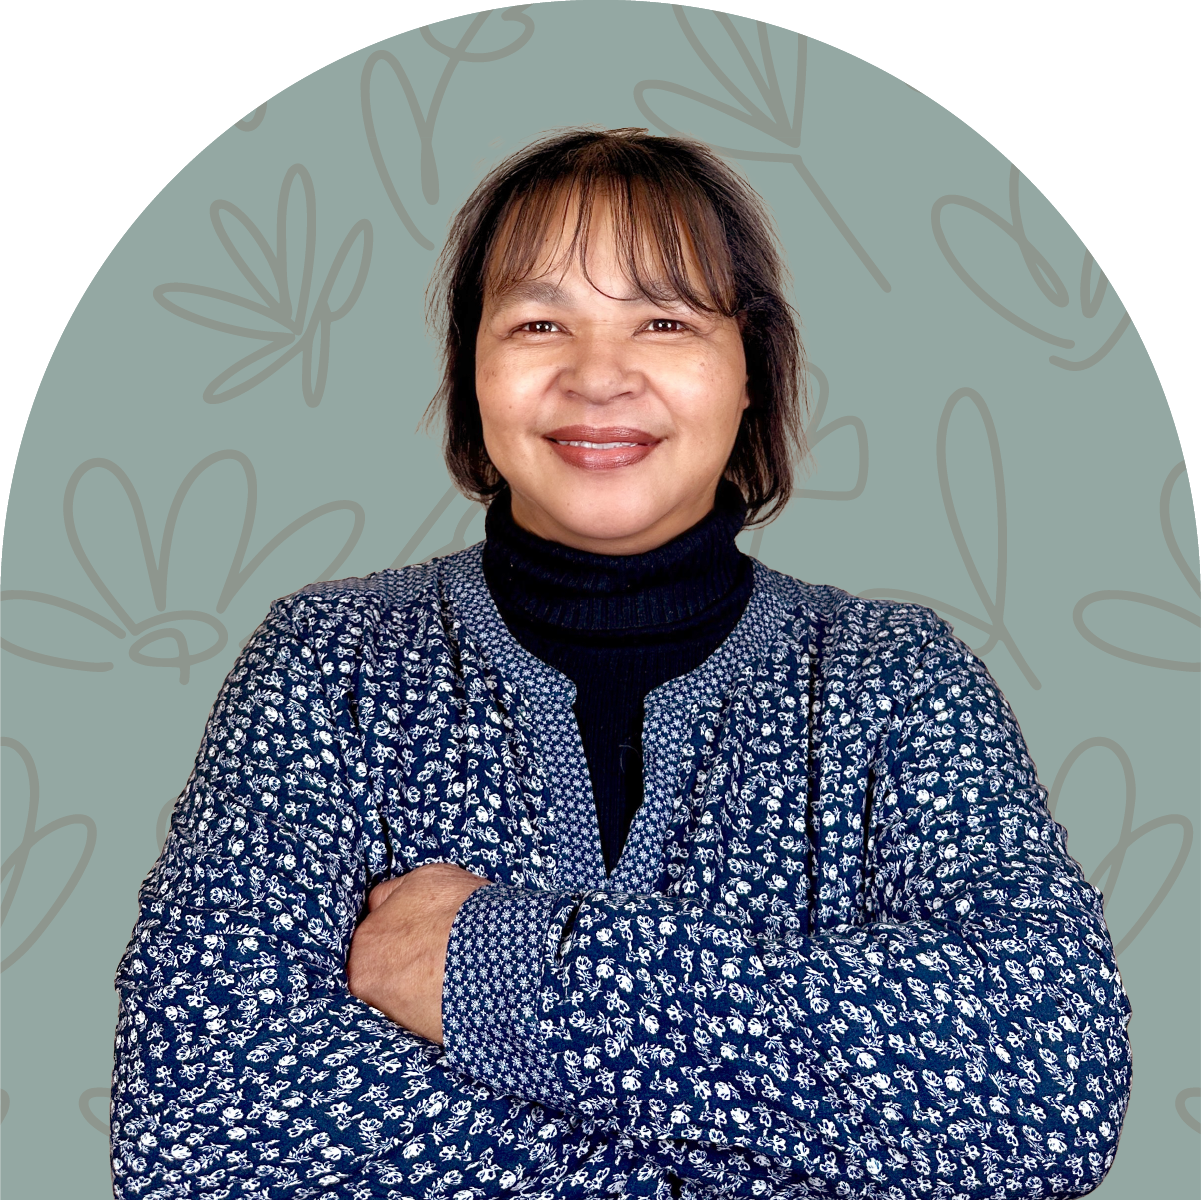 Portrait of Lillian, a team member at Fabulous Flowers, smiling in a patterned blue sweater against a green background. MEET THE TEAM at Fabulous Flowers and Gifts.